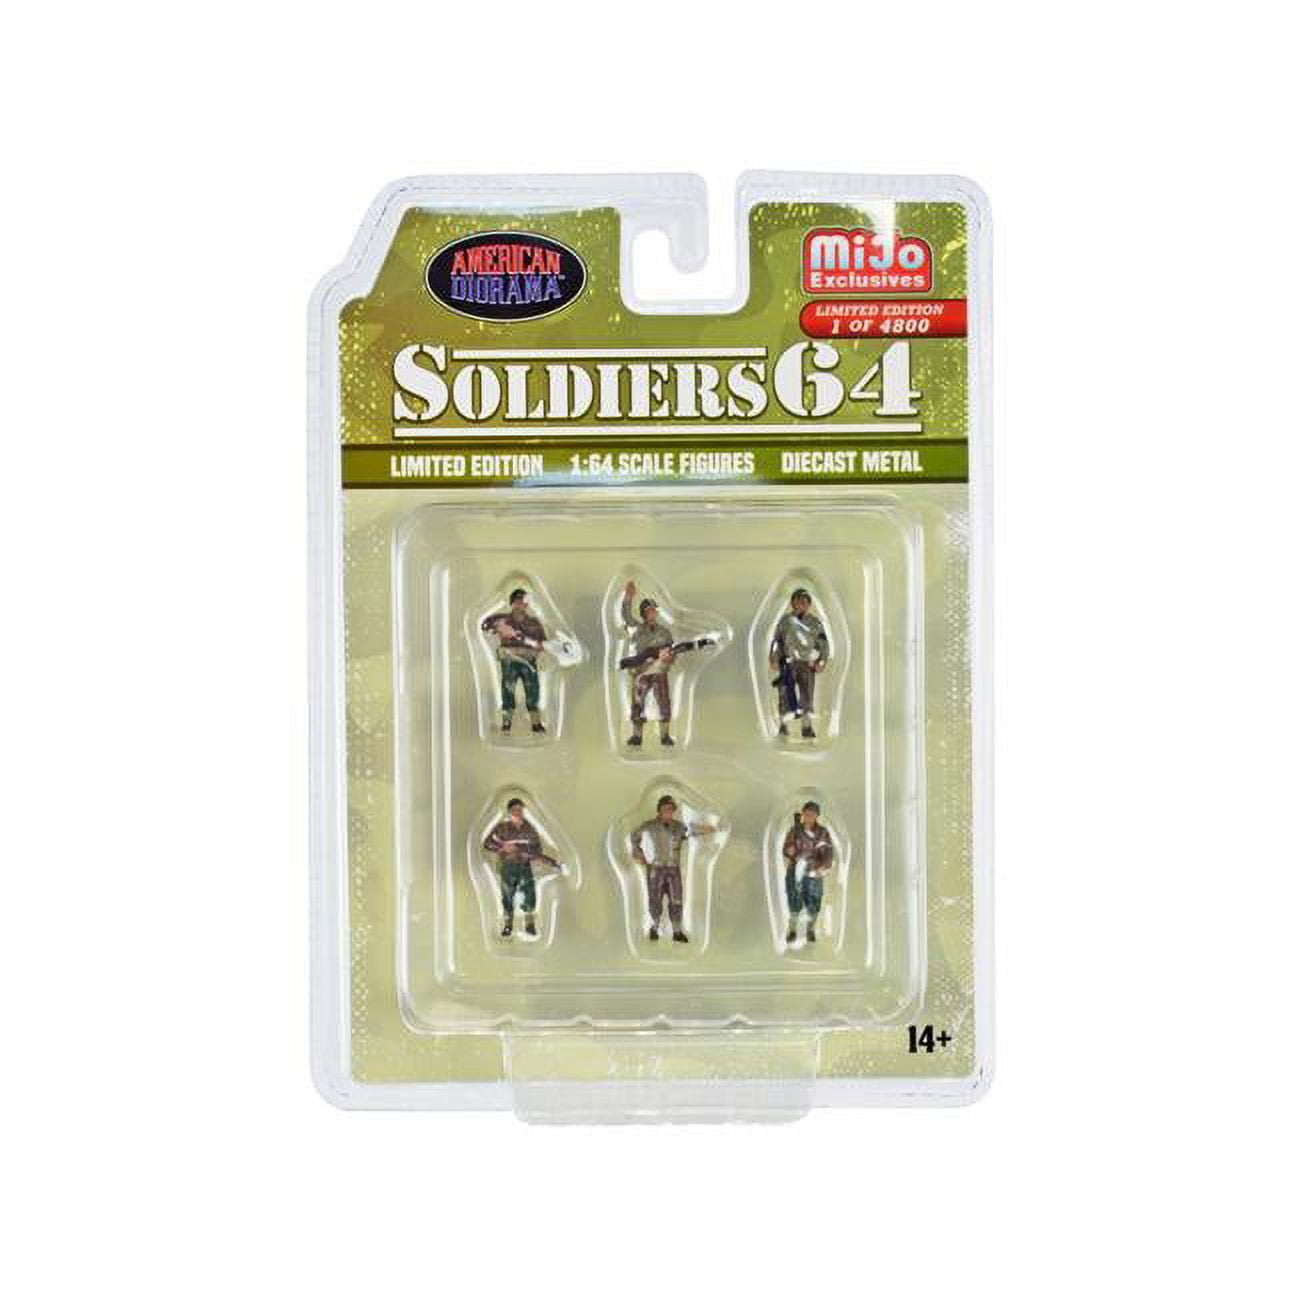 Picture of American Diorama AD-76502MJ Soldiers 64 Diecast Military Figures Set - Limited Edition to 4800 Pieces Worldwide for 1 by 64 Scale Models - 6 Piece